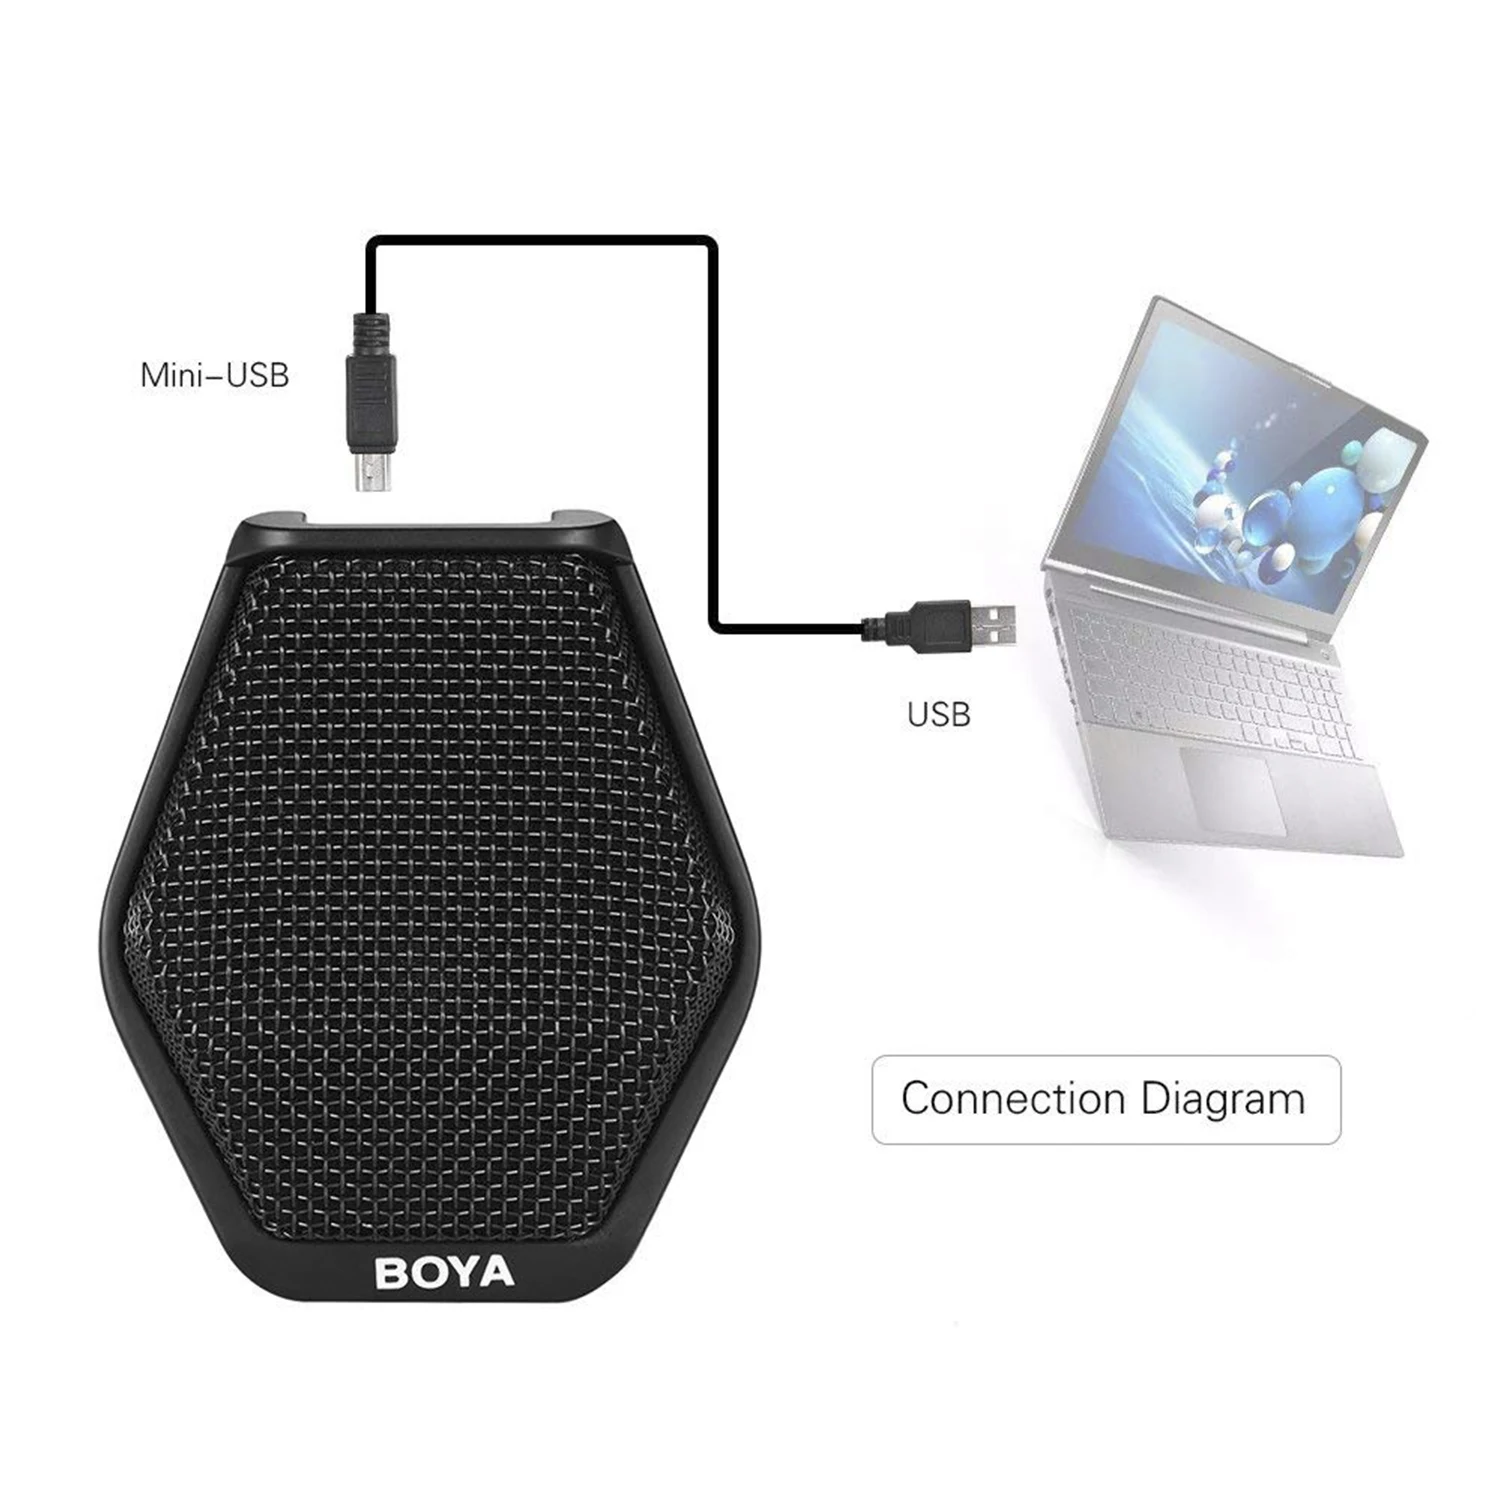 BOYA BY-MC2 USB Condenser Desktop Conference Computer Microphone with 180 Degree / 20' Pickup Range for Windows & Mac & Laptop enlarge